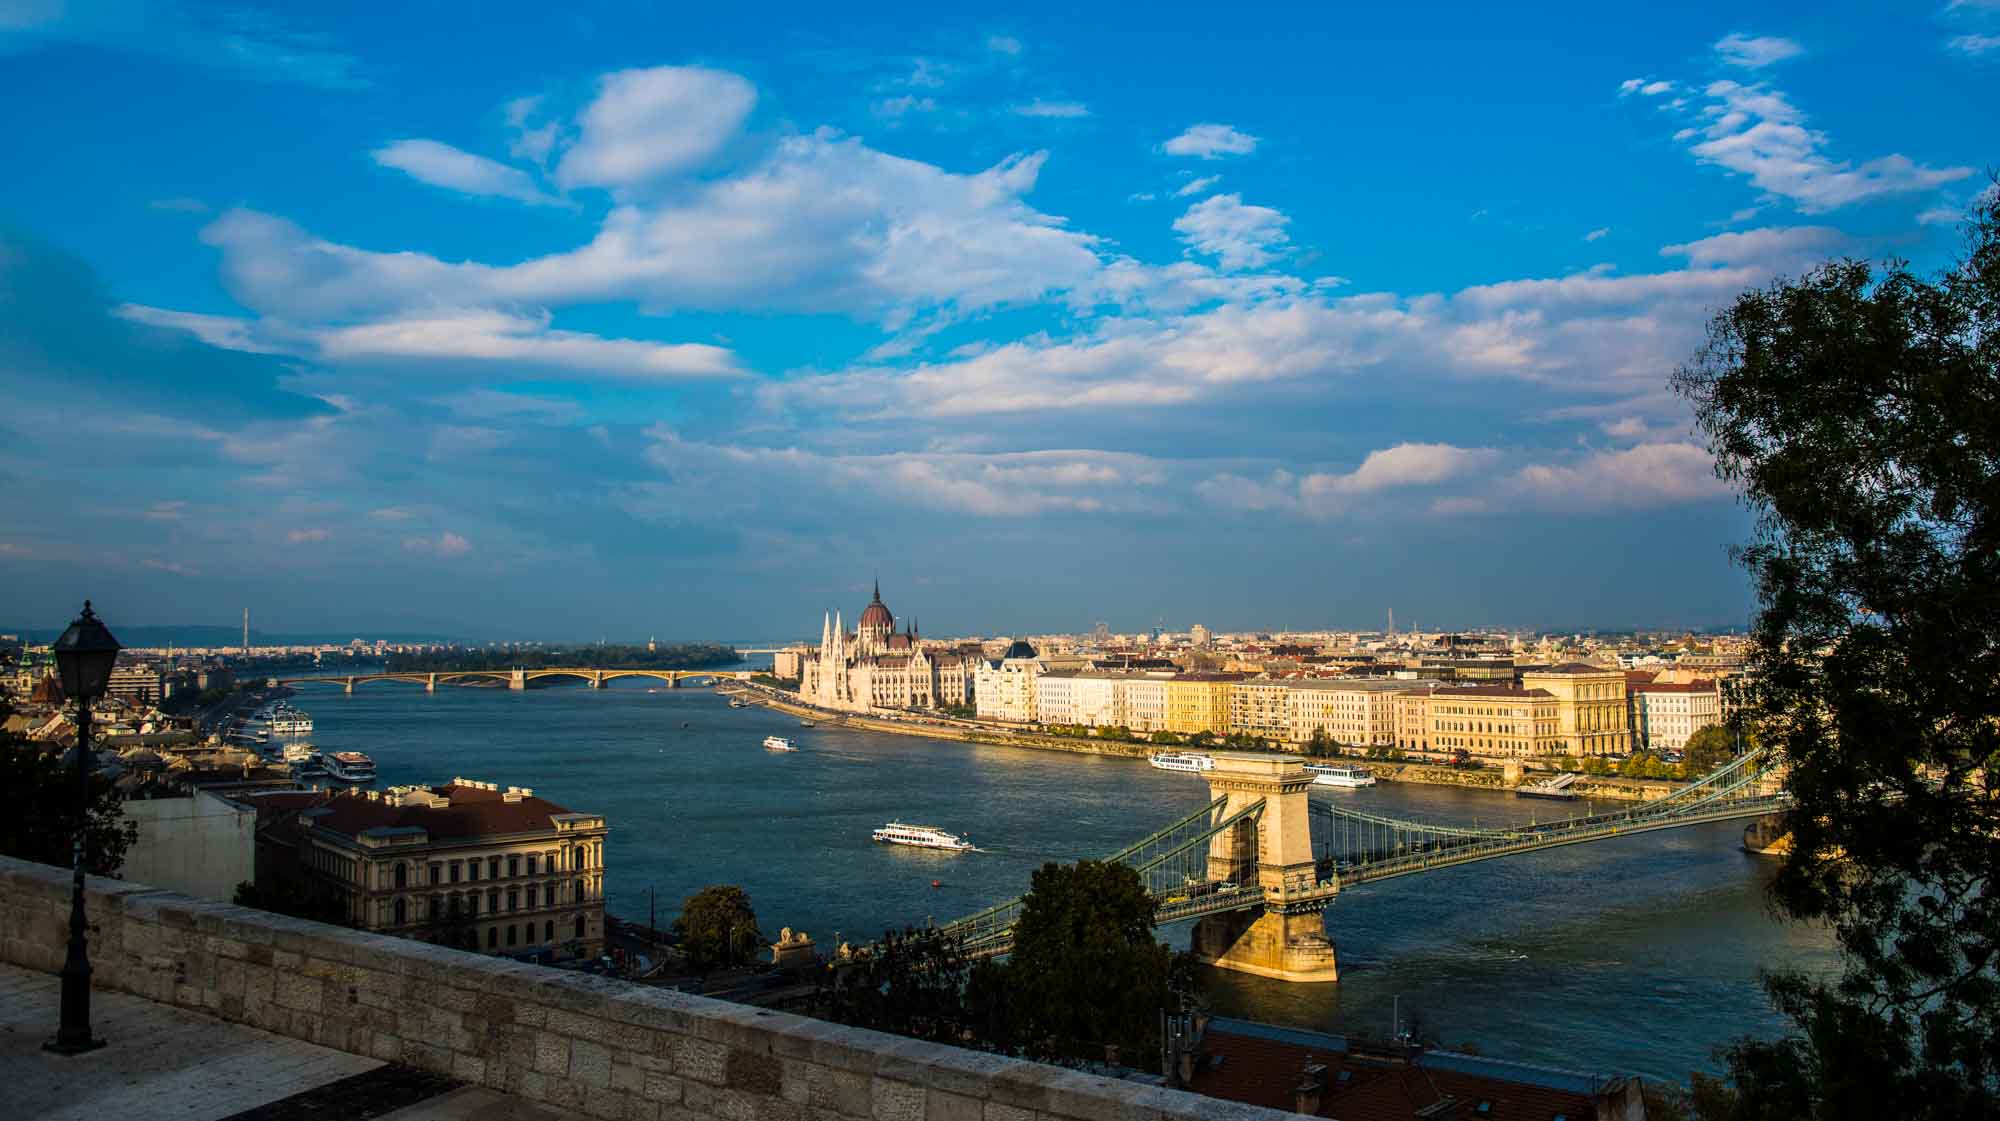 The Danube River, Budapest, Hungary - Travel Past 50